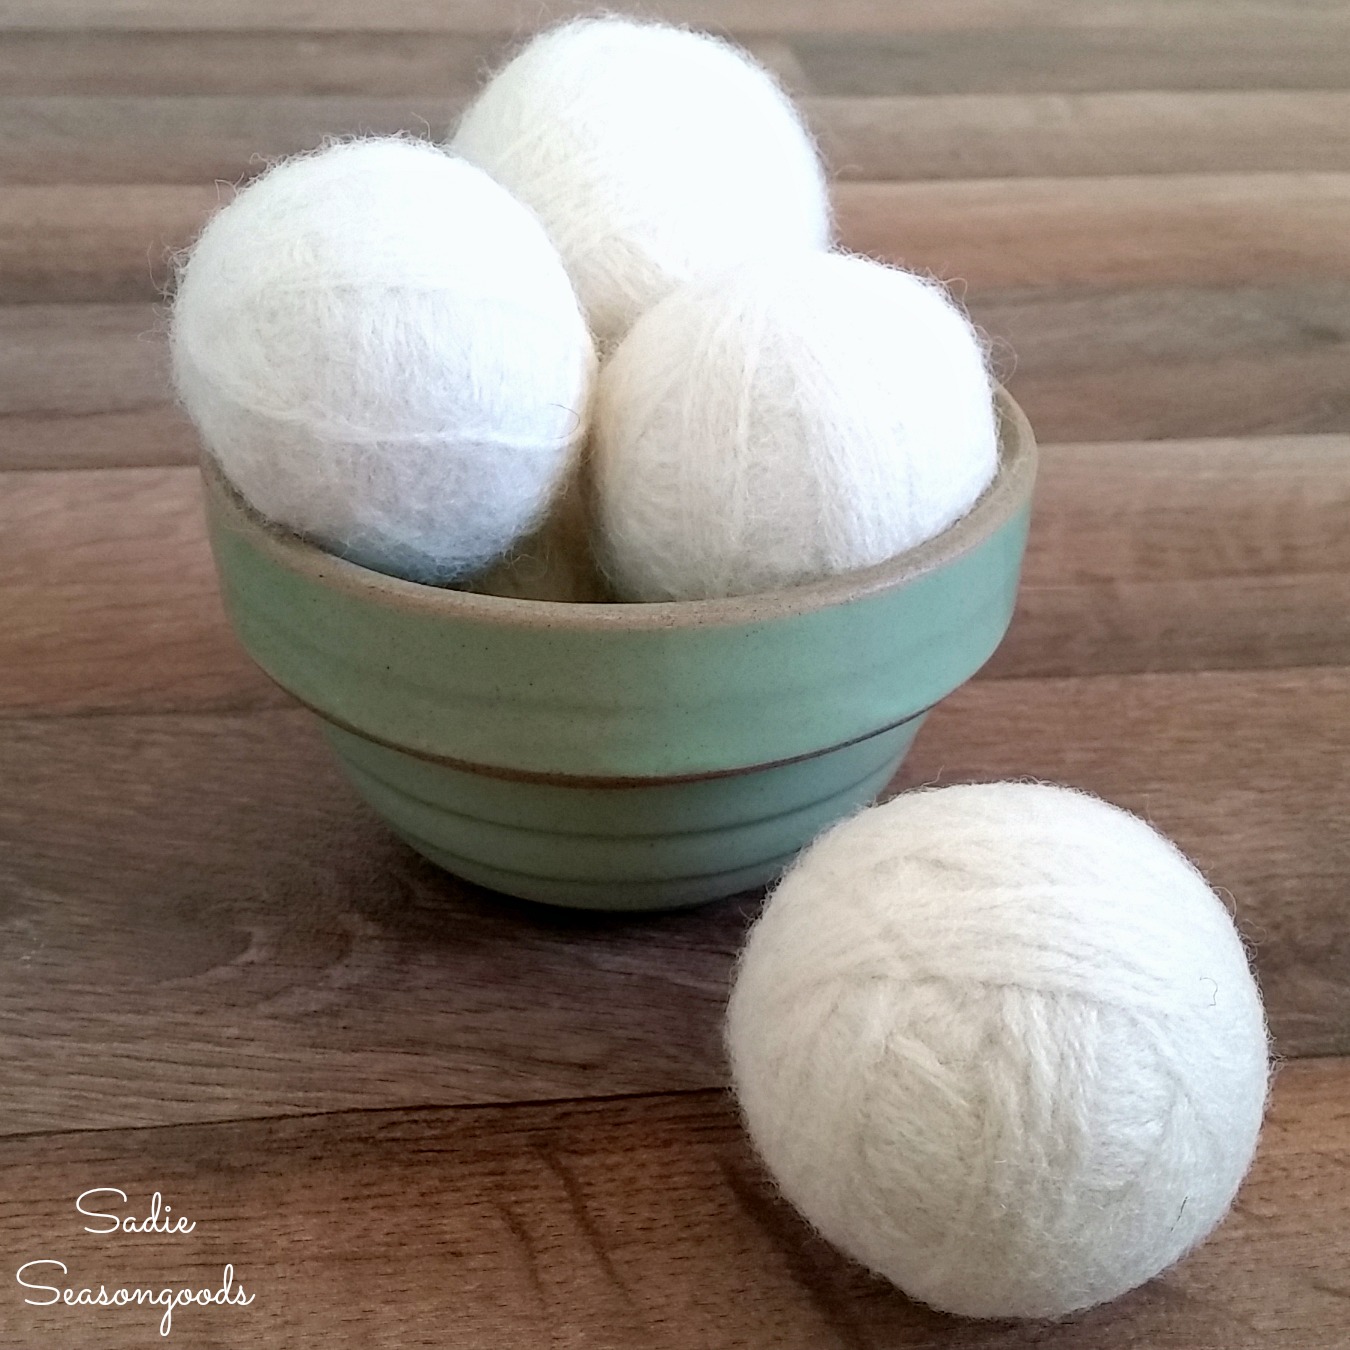 how to make wool dryer balls from yarn